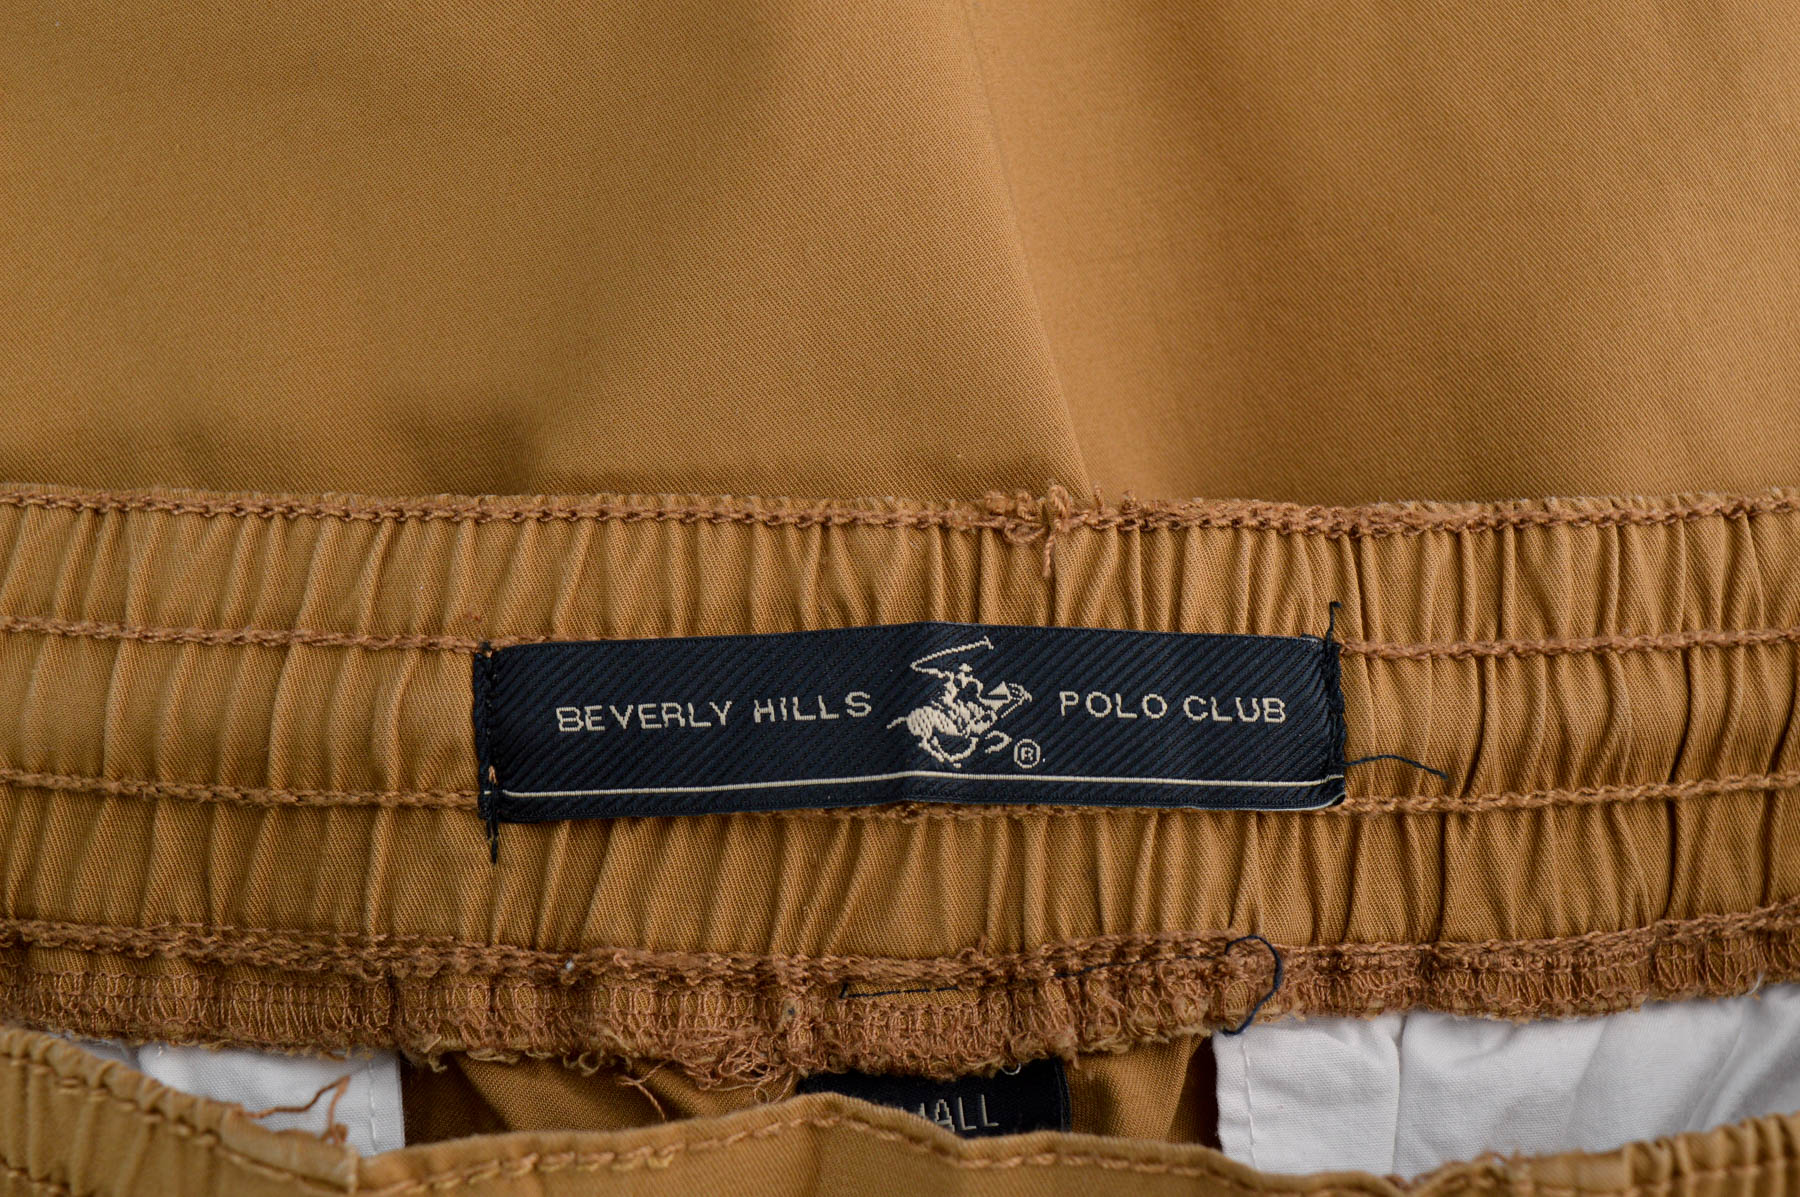 Men's trousers - Beverly Hills Polo Club - 2